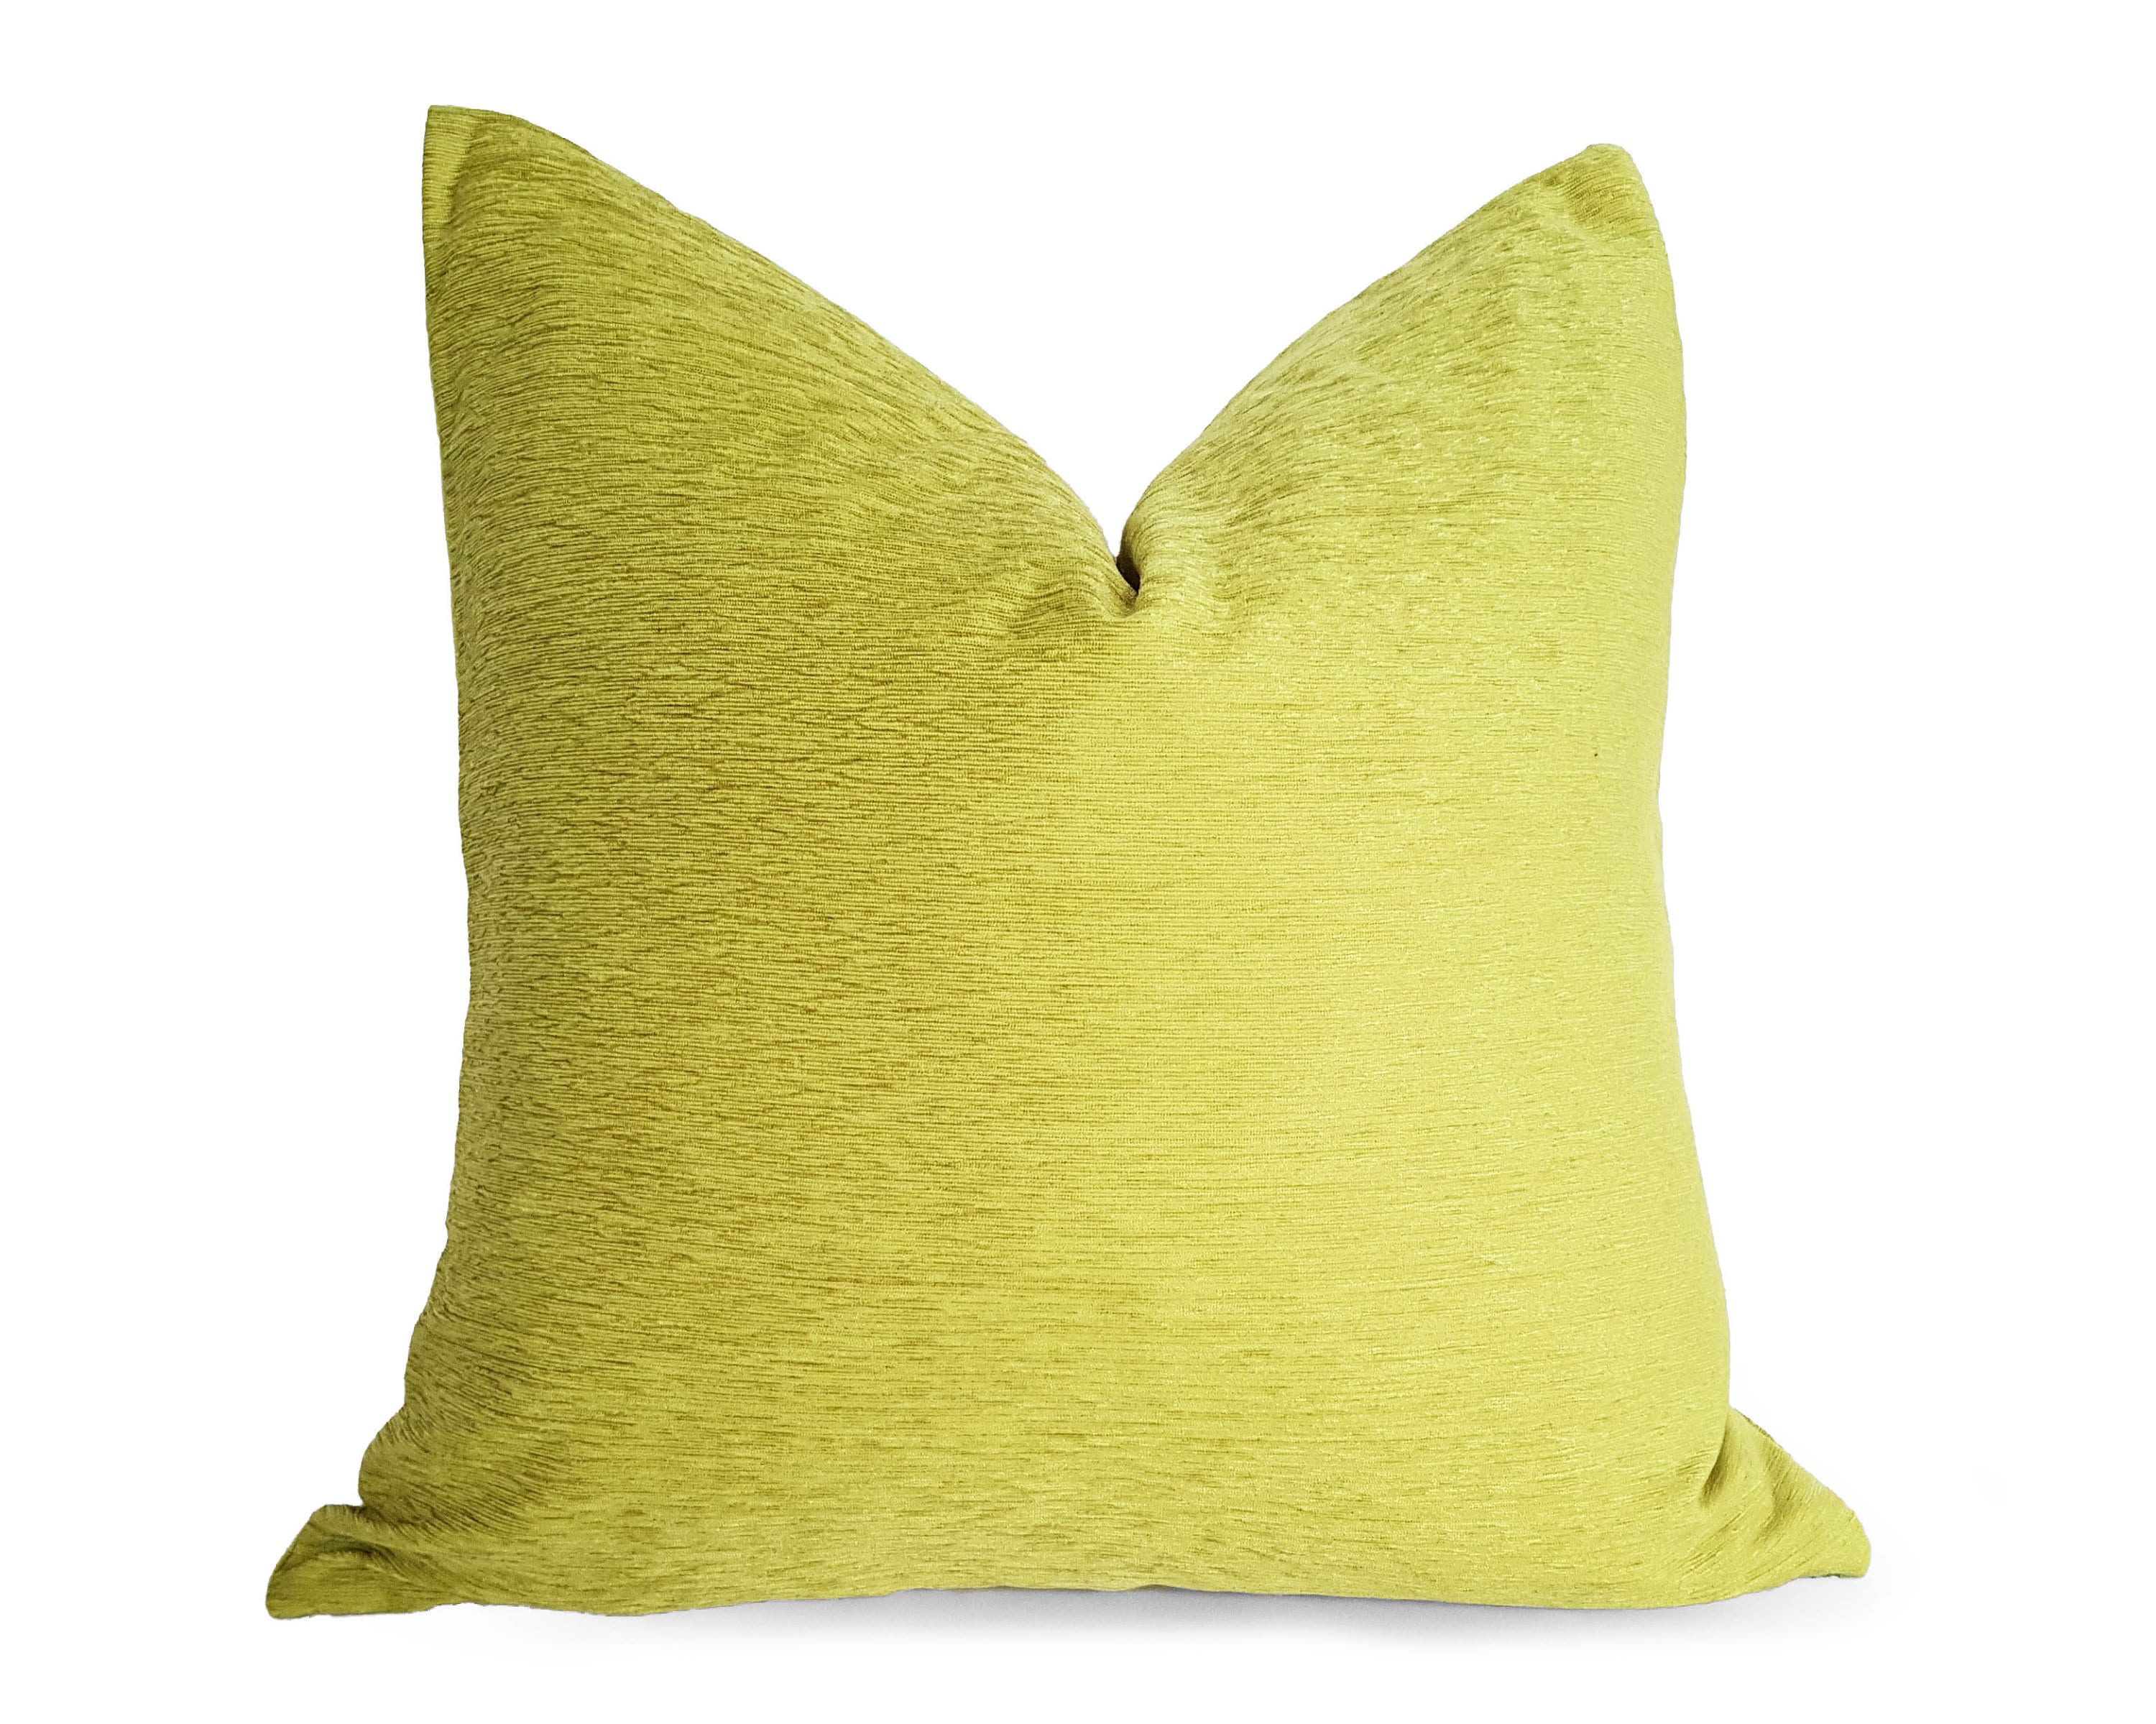 Lumbar Support Pillow, Brown, Olive, Lime Green and Chartreuse Throw Pillow  for Bed Decor, Couch Pillows Set, Outdoor Sofa Cushion 